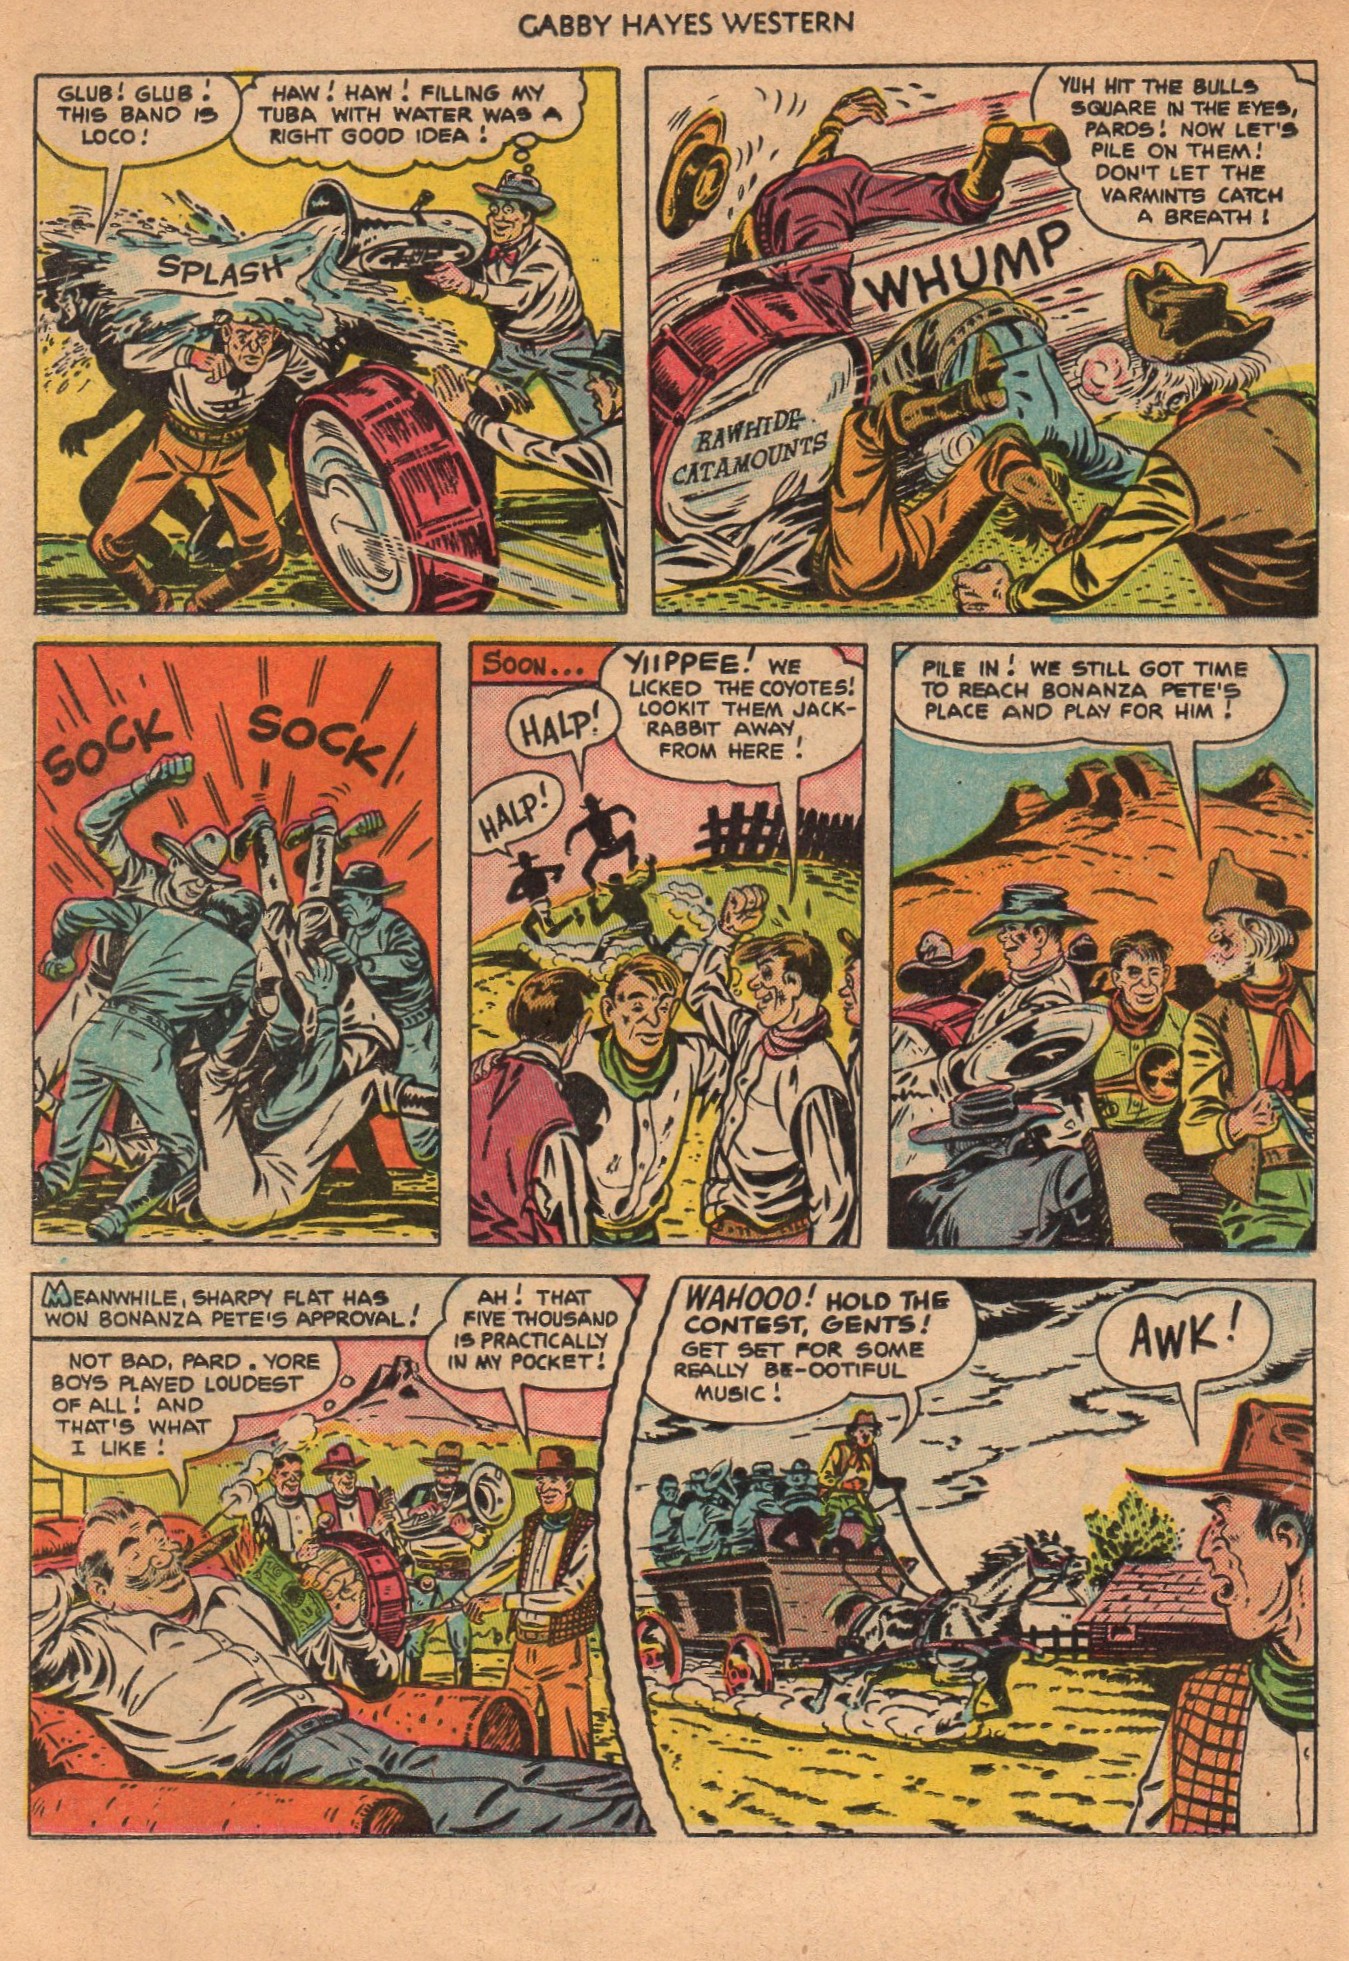 Read online Gabby Hayes Western comic -  Issue #46 - 18